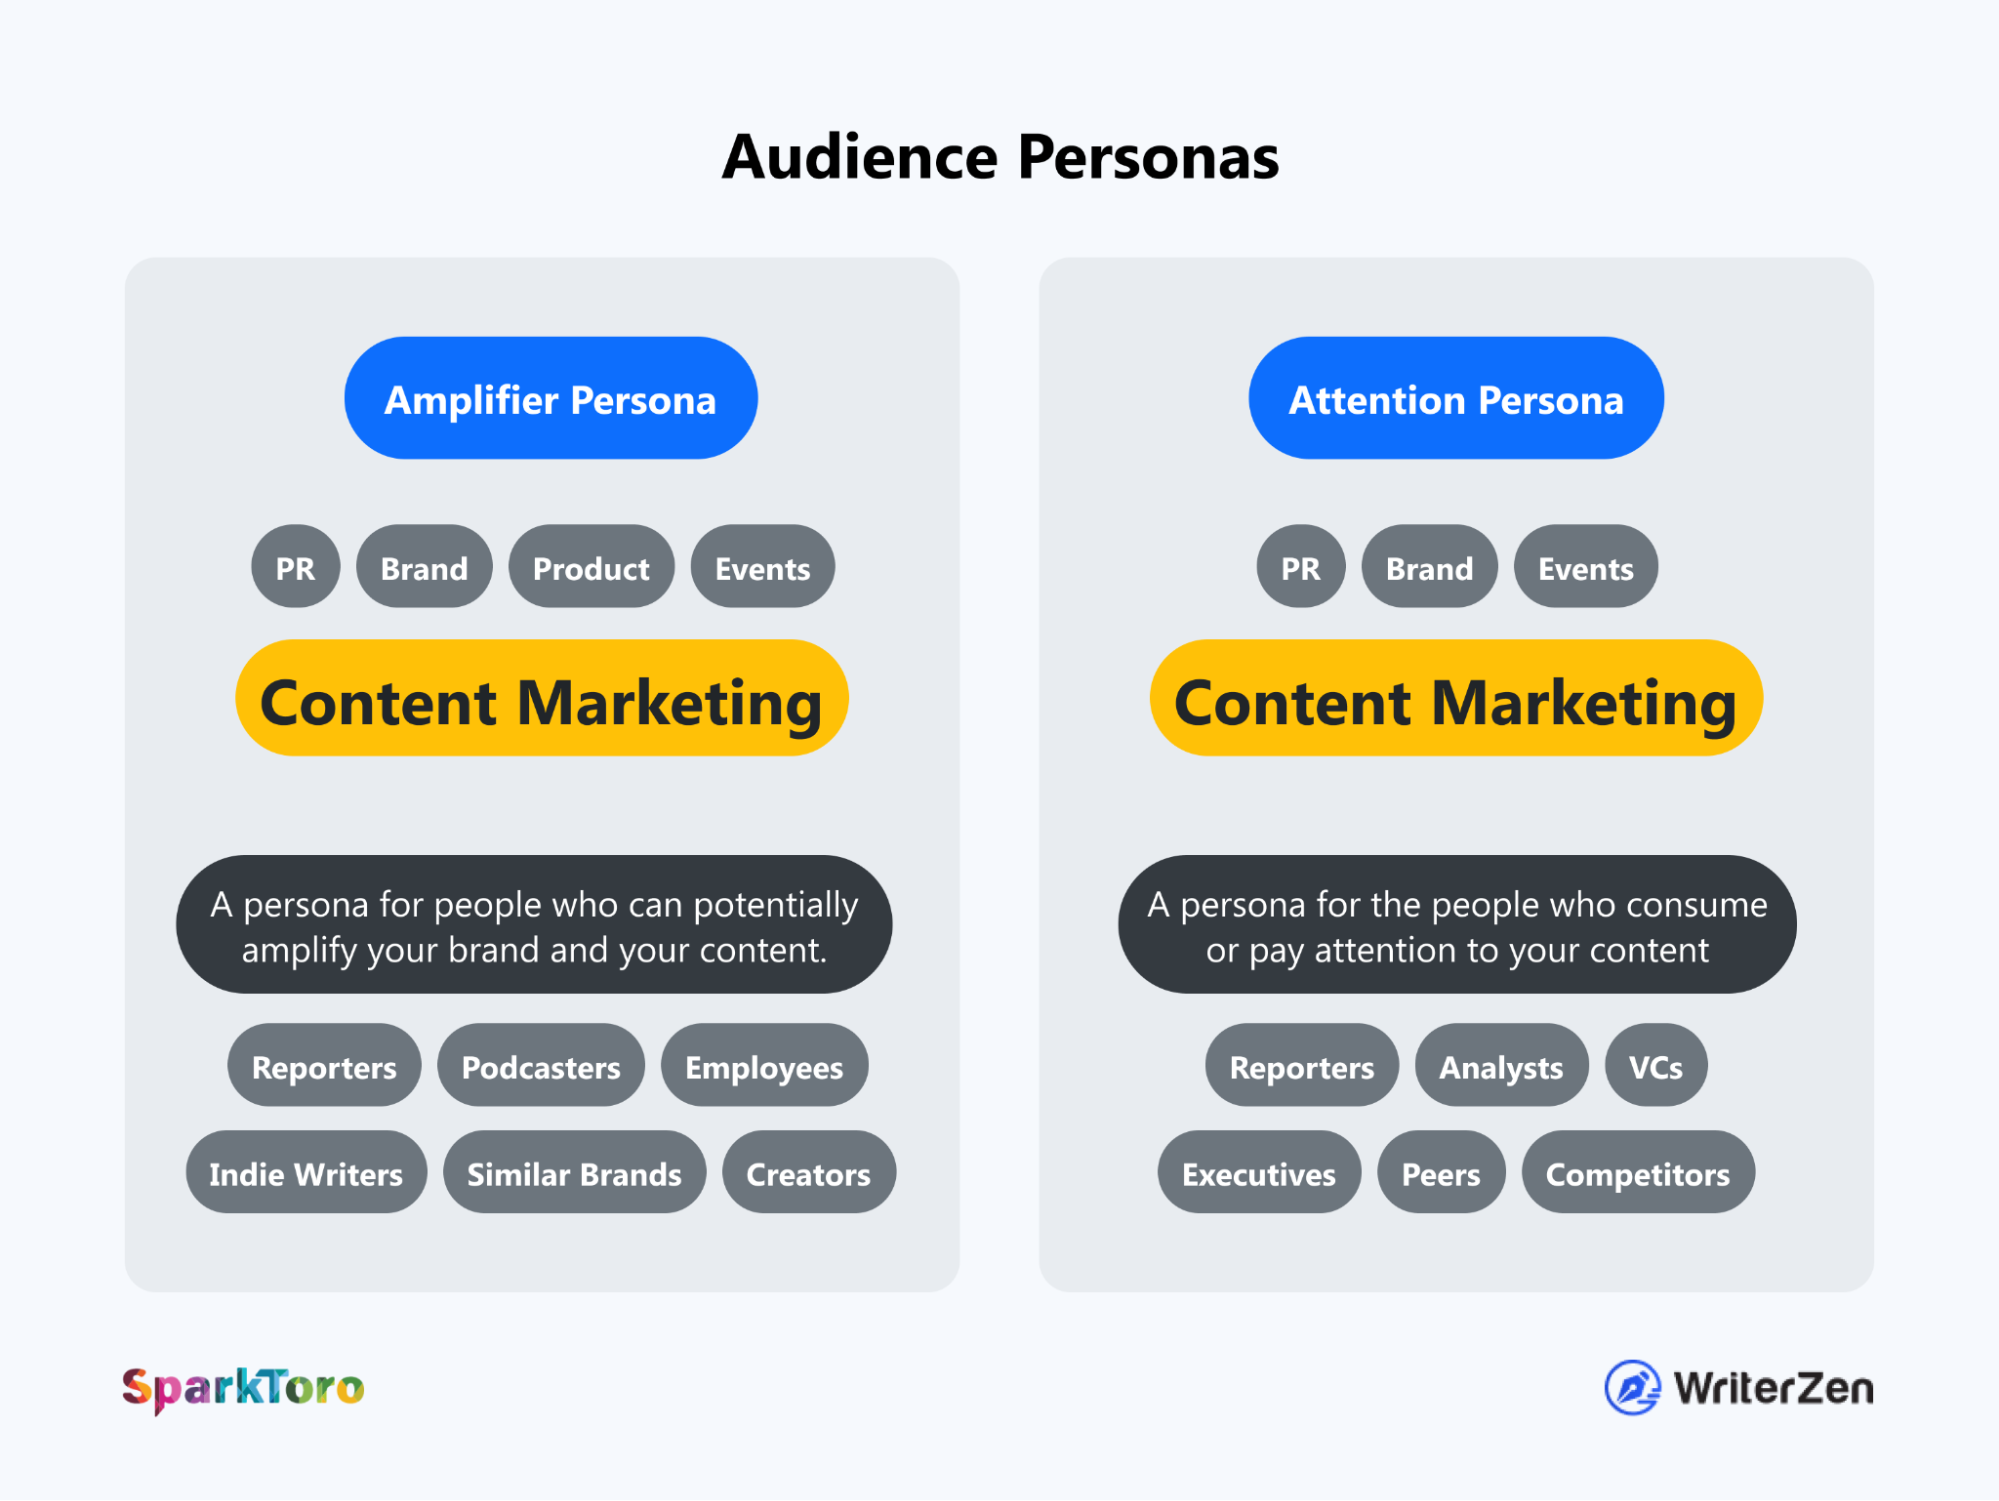 Two Types of Audience Personas